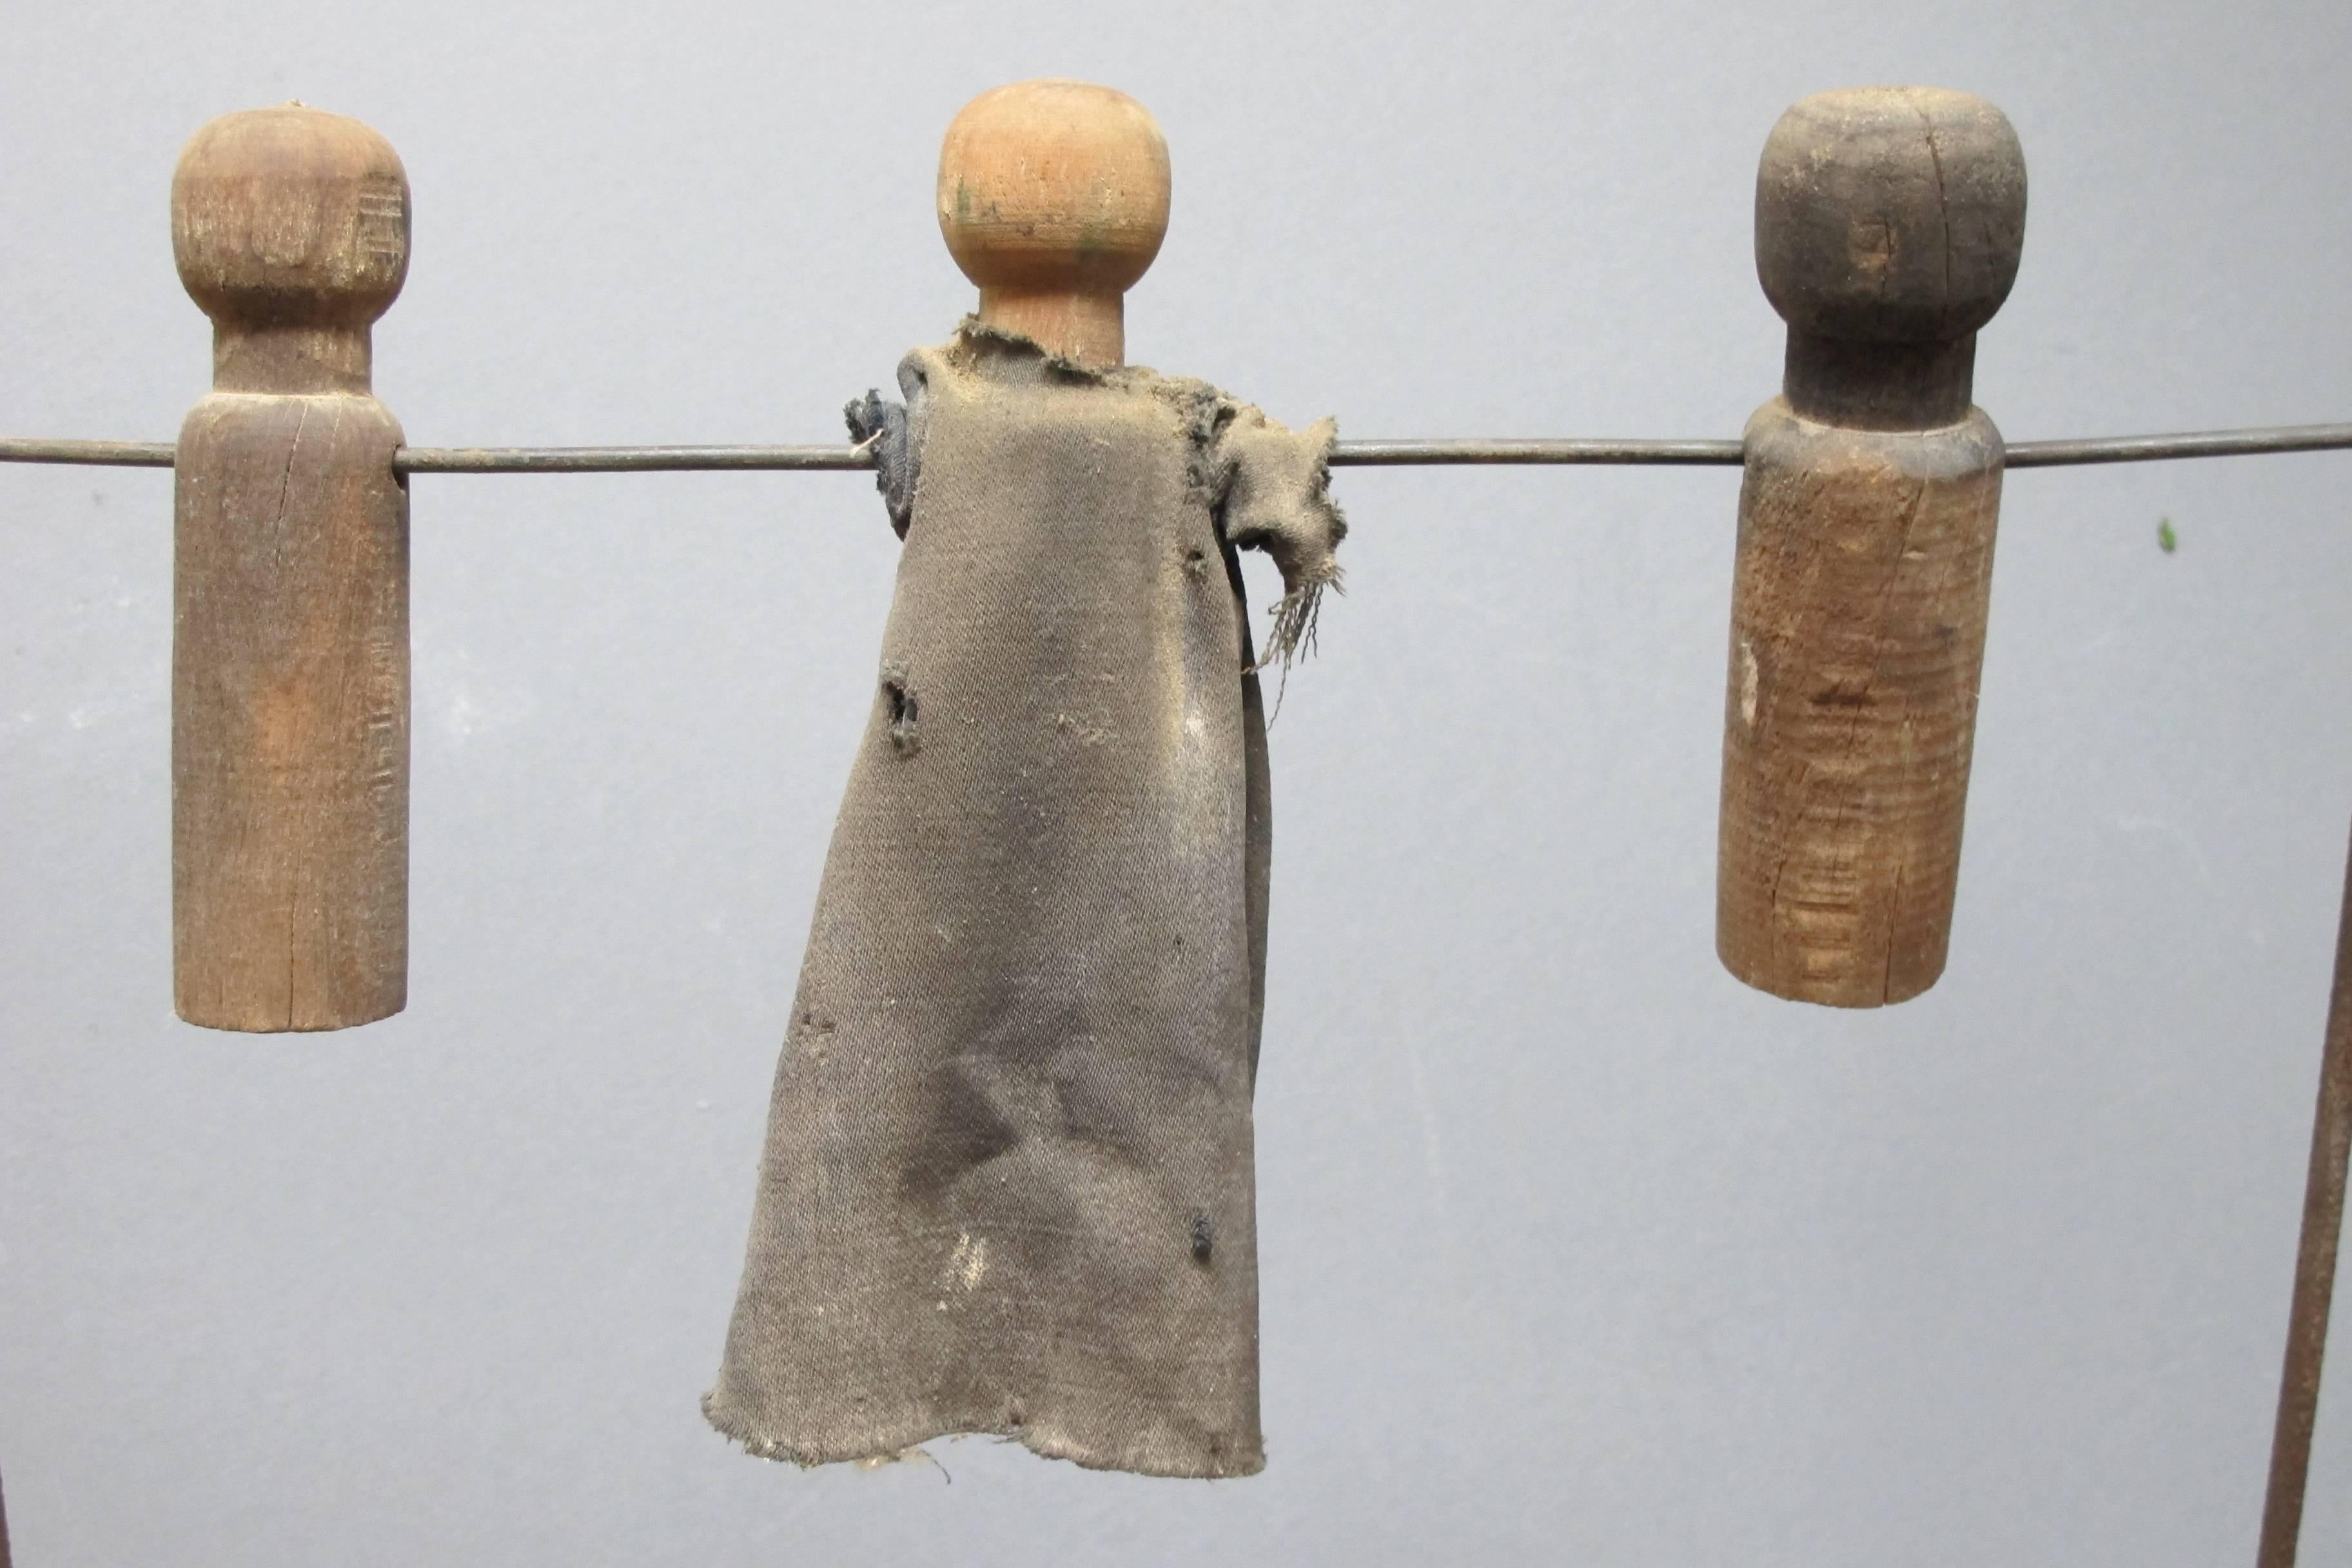 Metal frame with two horizontal rods hold three turned wood dolls with holes drilled through on each. Two of the figure have remains of their original clothes. I double frames pivots out to stand like a swing set or can be folded flat to hang on a